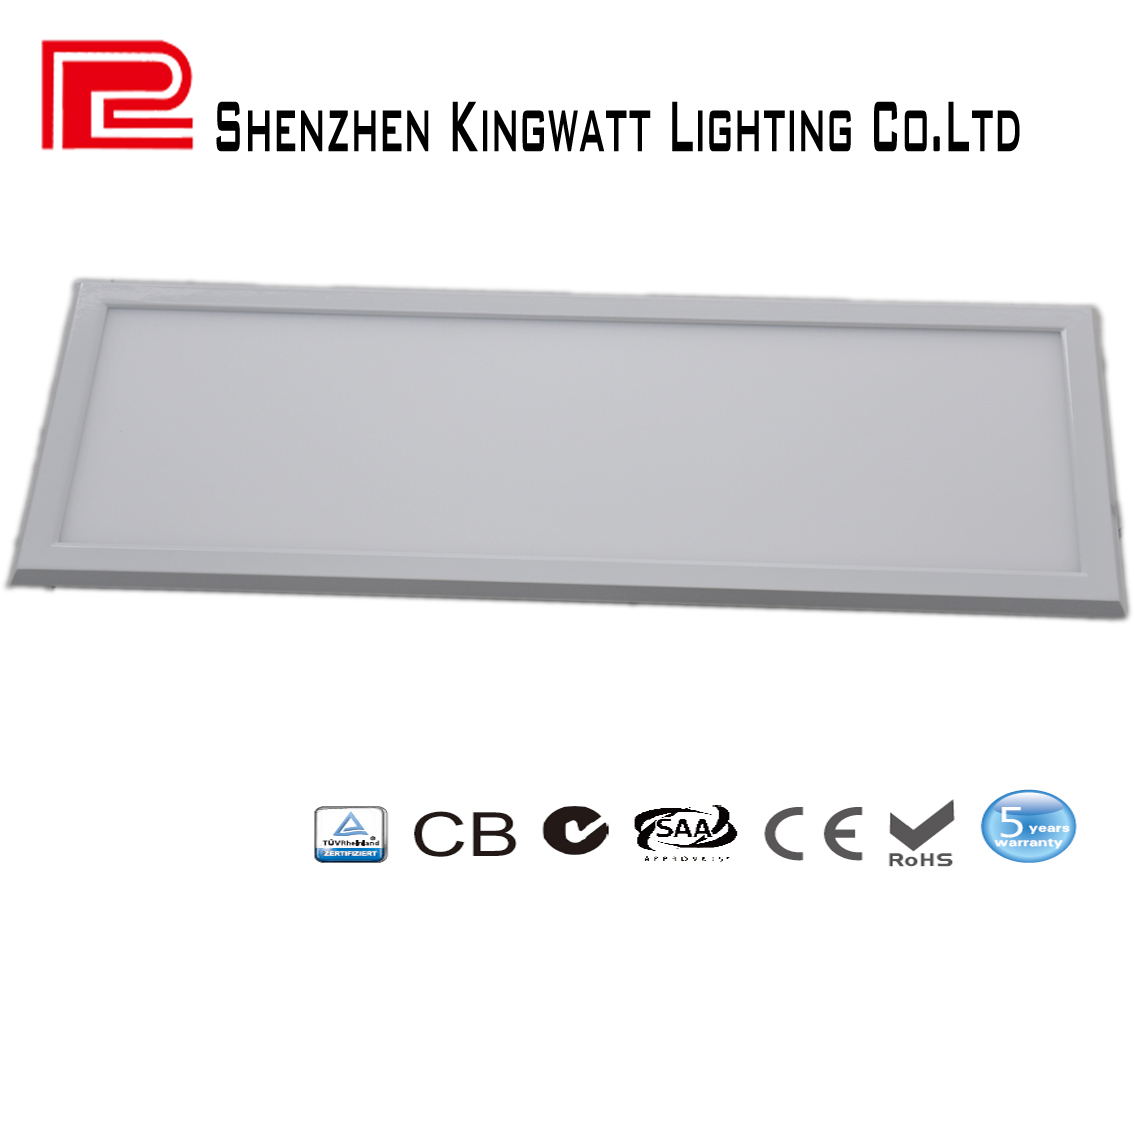 CE/RoHS 85Lm/W Magnetic suction LED panel light 300x600mm,16W